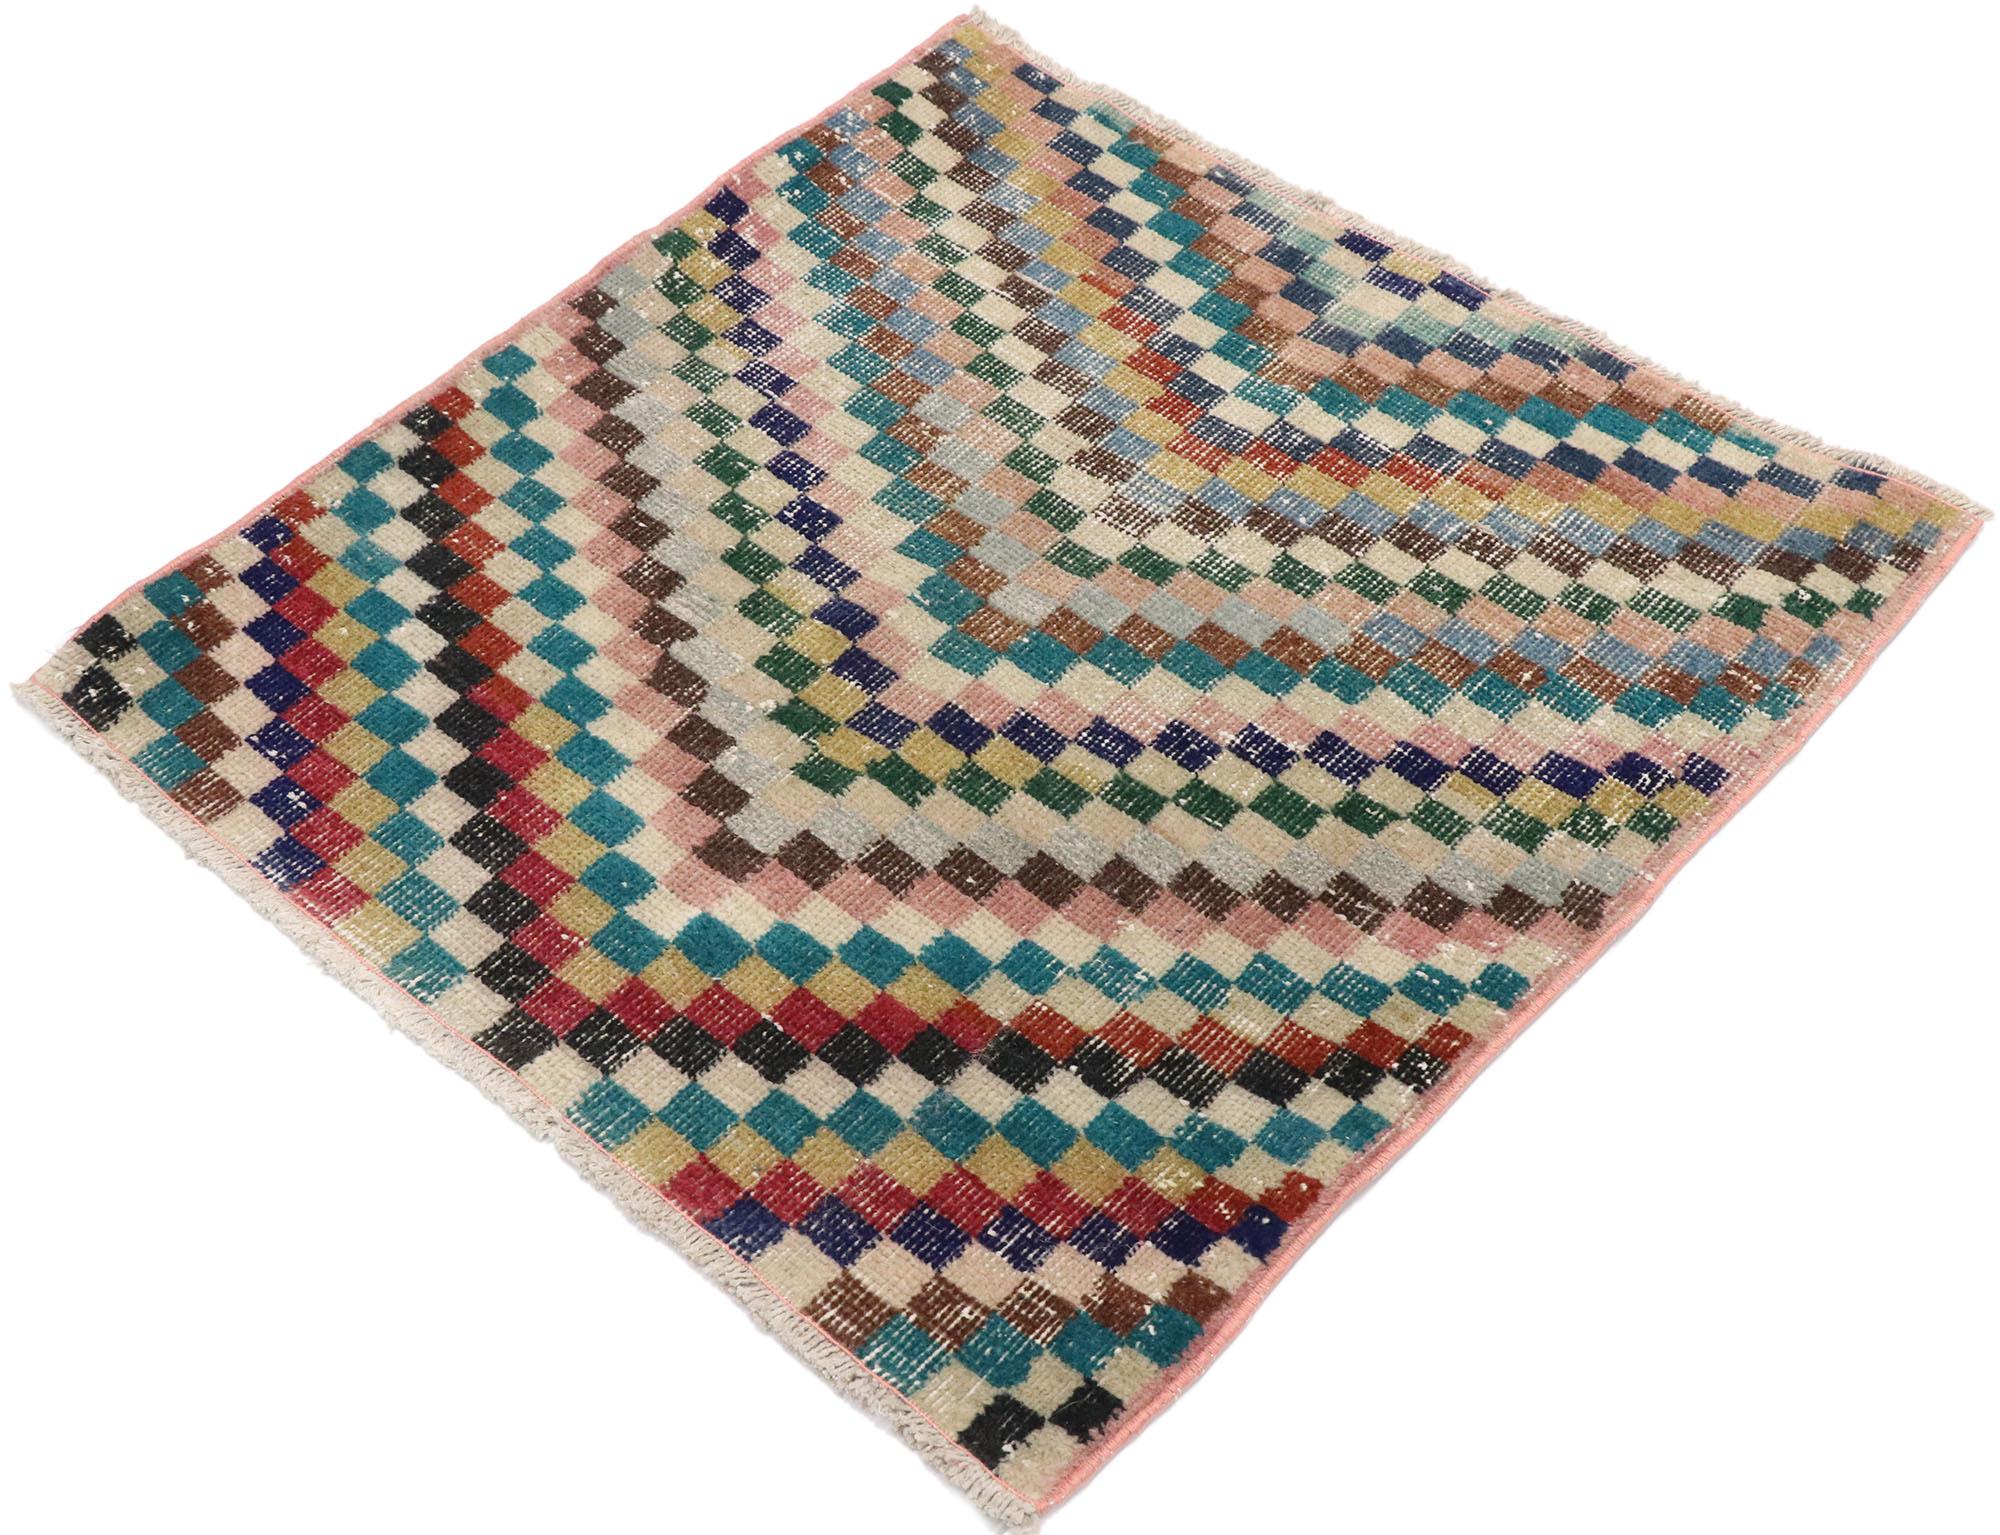 53349 Distressed Vintage Turkish Sivas Rug with Rustic Mid-Century Modern Cubist style. This hand knotted wool distressed vintage Turkish Sivas rug features an all-over checkered chevron pattern comprised of rows of multicolored squares. Each row of